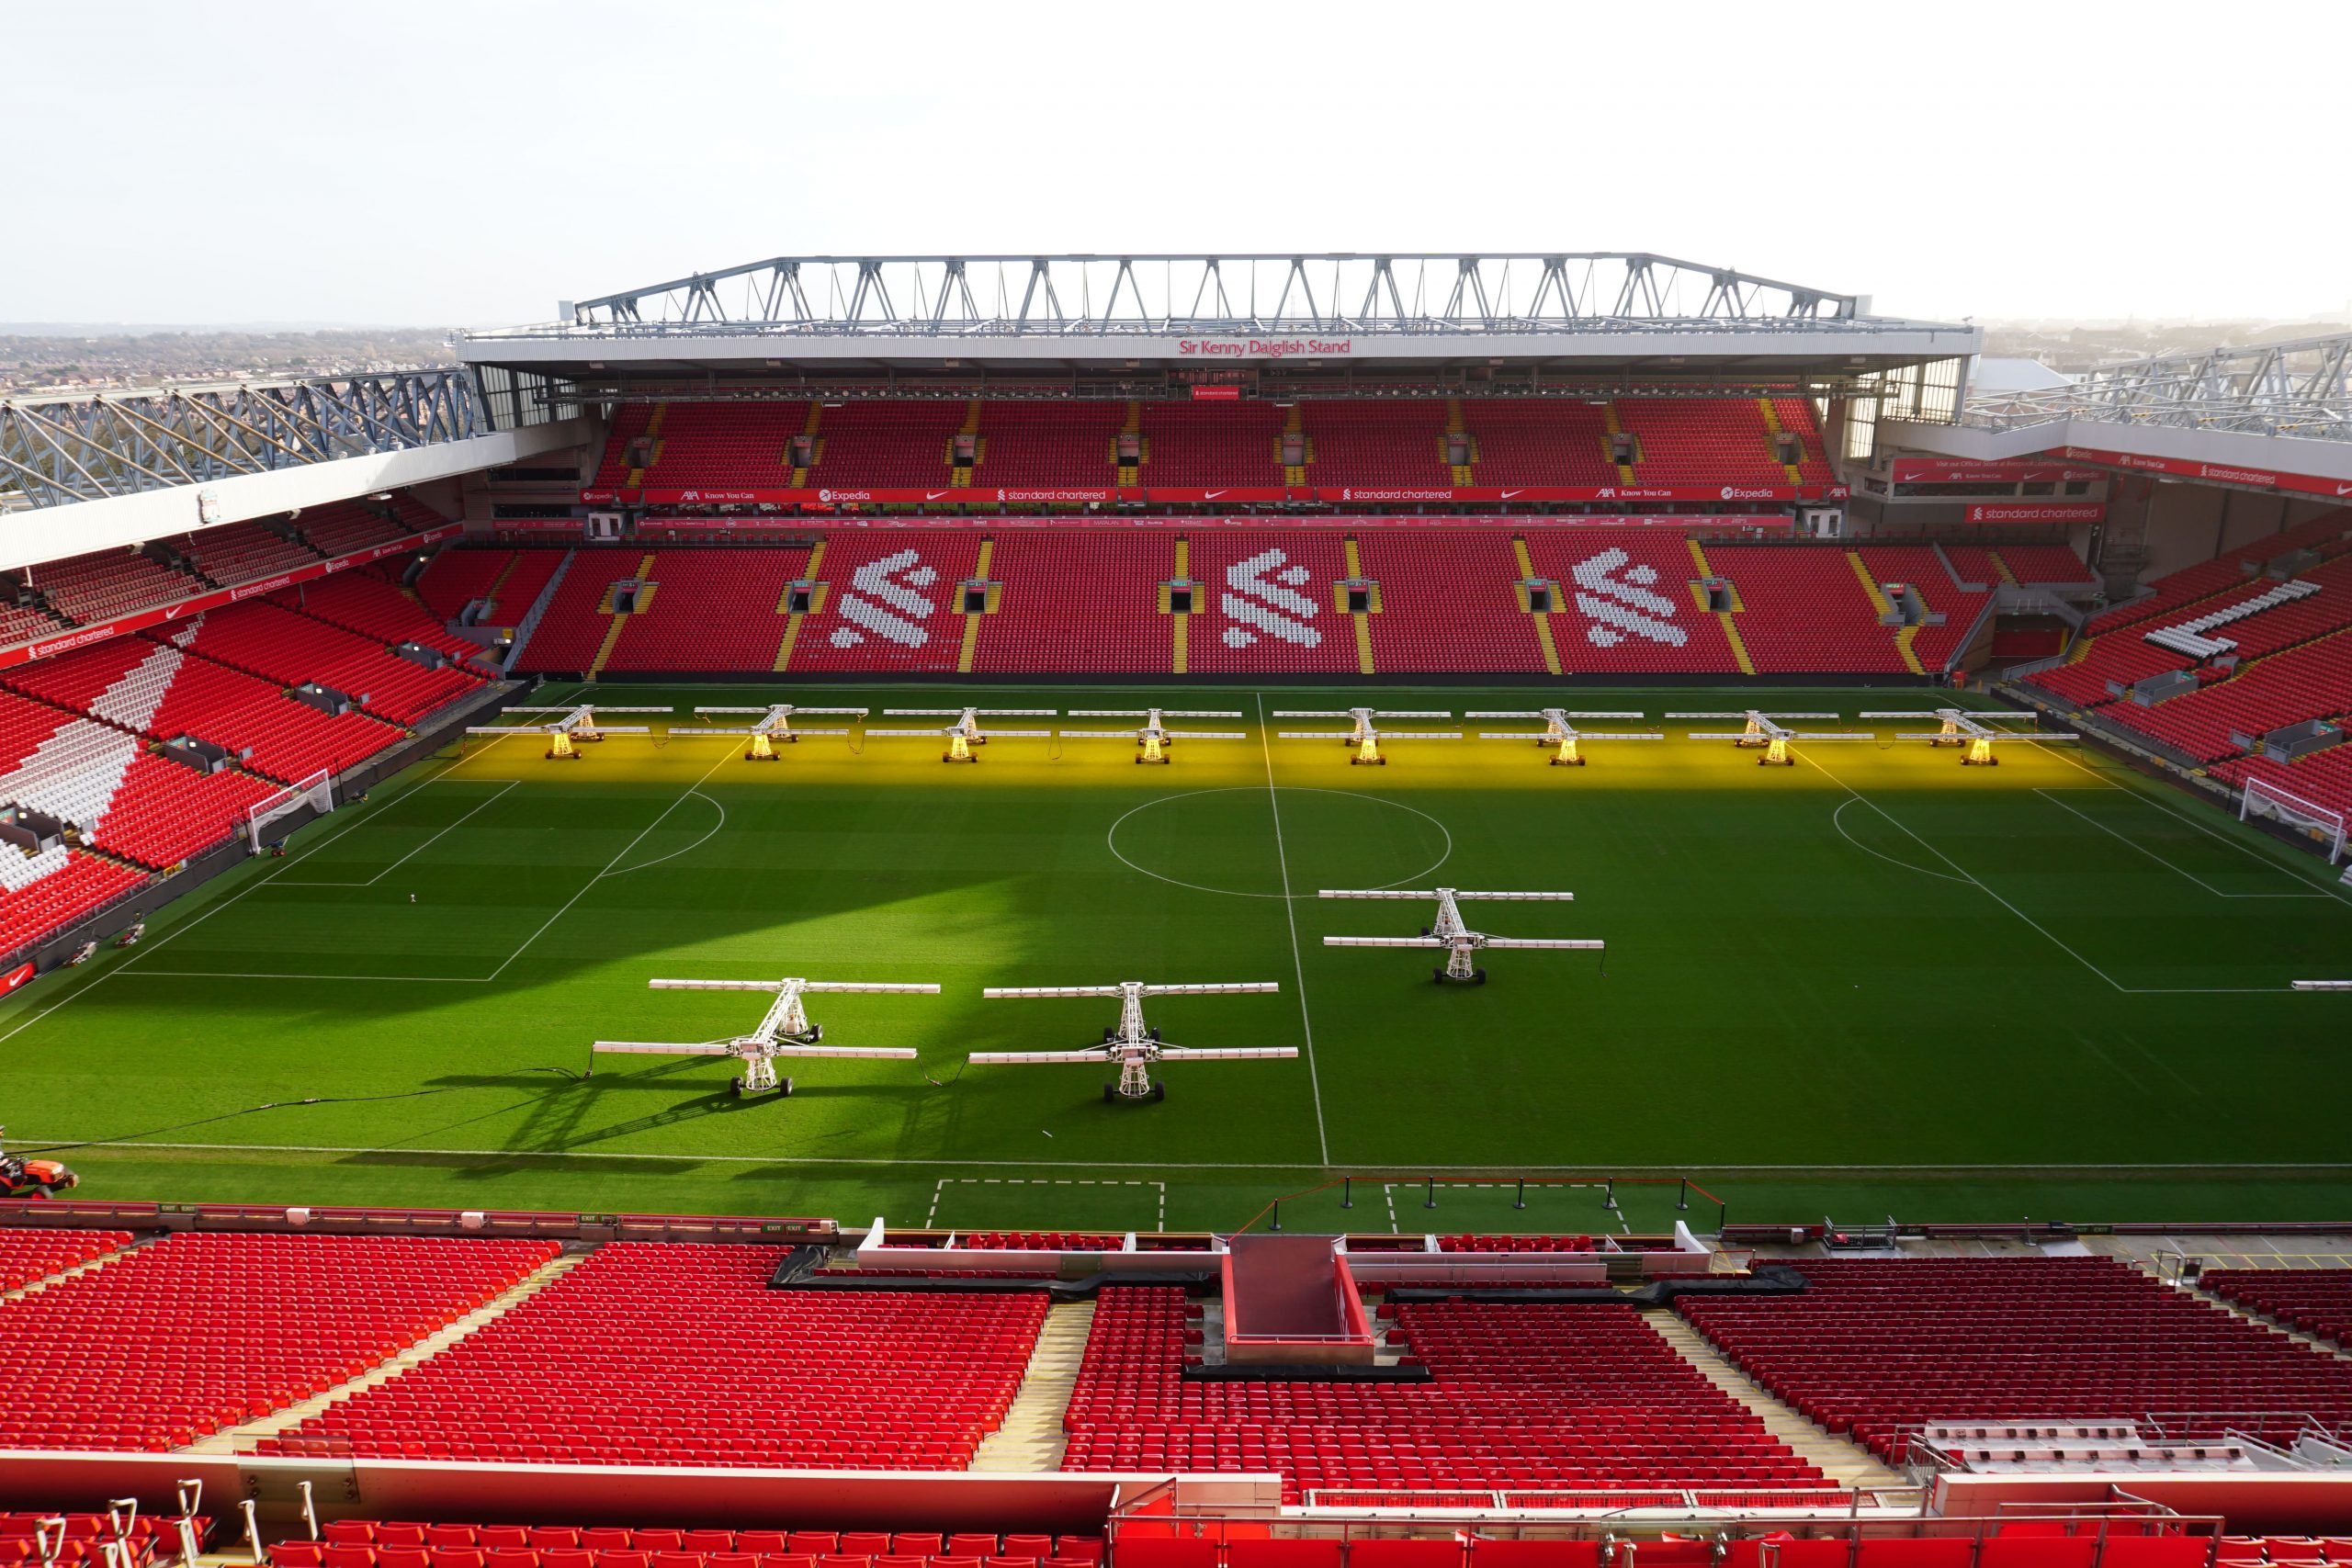 Anfield football arena